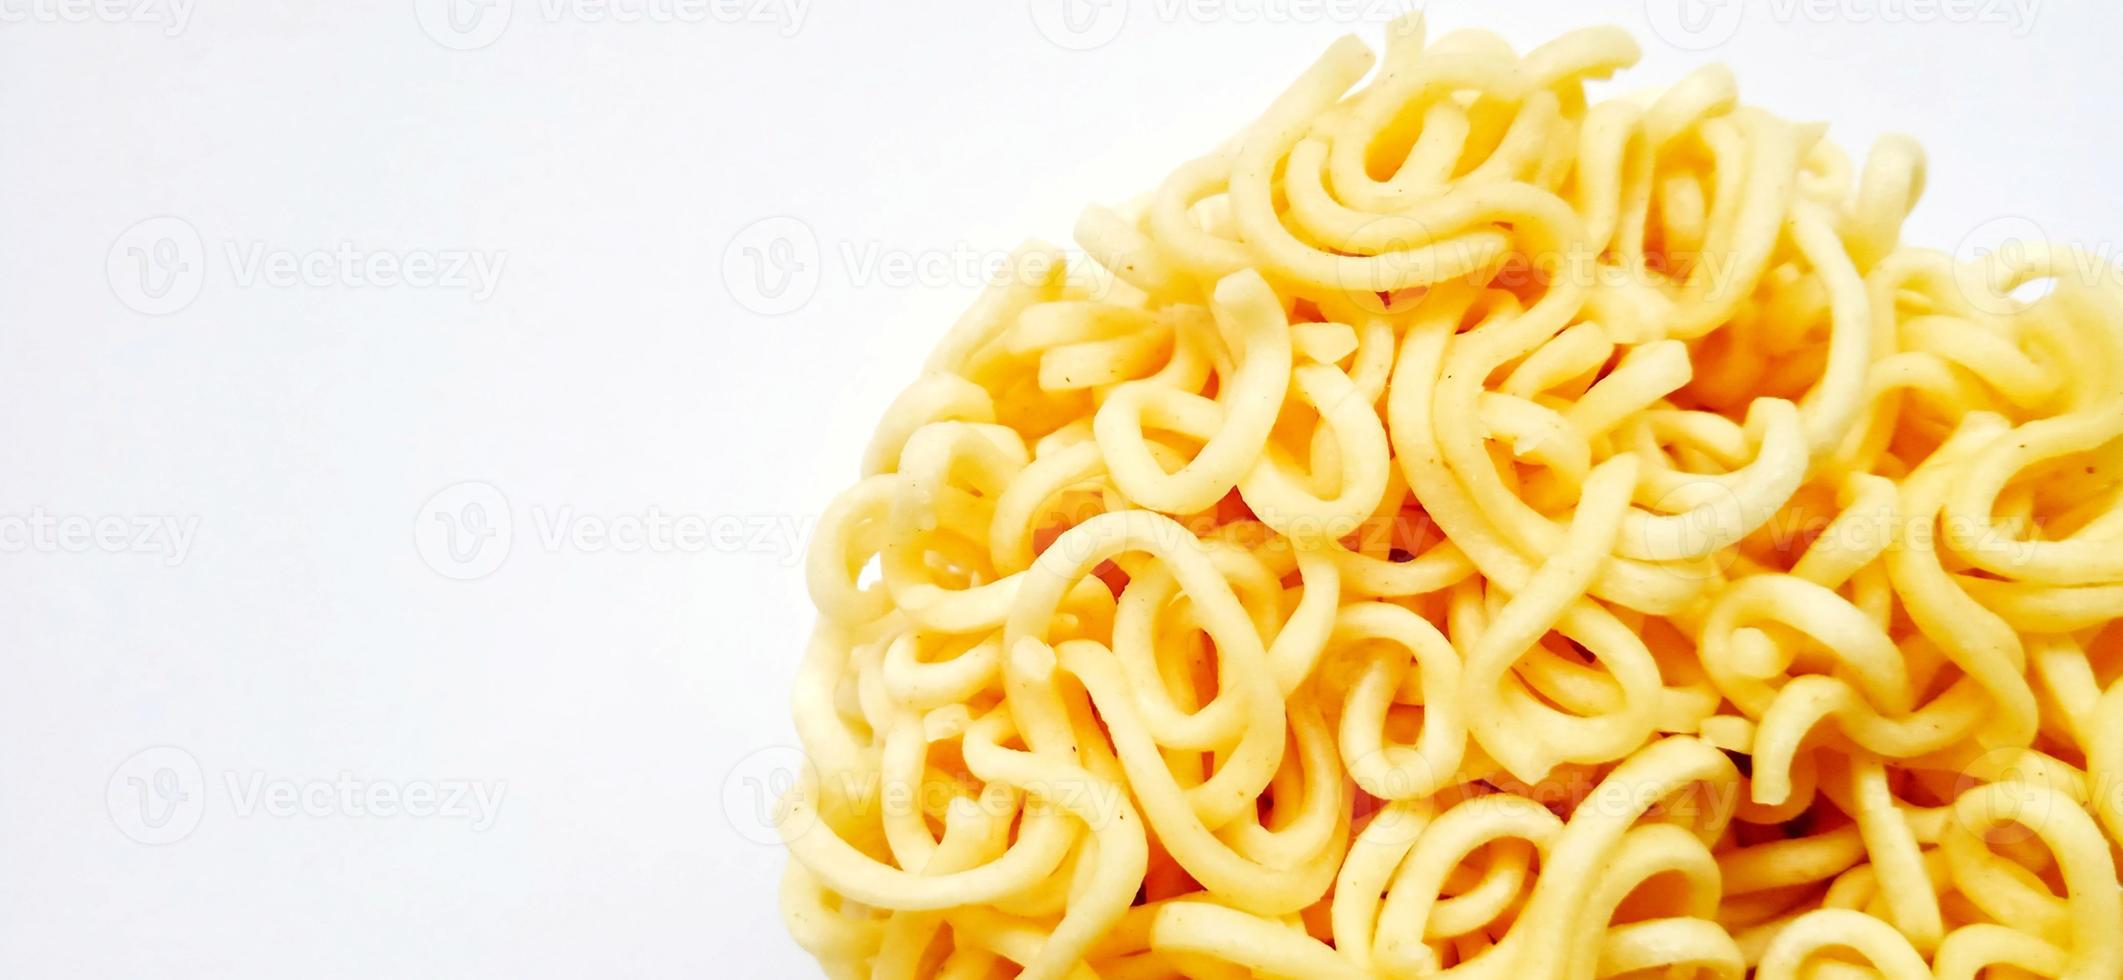 Uncooked instant noodles with negative space isolated on the gray white studio background. Food background design. Suitable for promotion of food and beverage industry and company, food advertising. photo